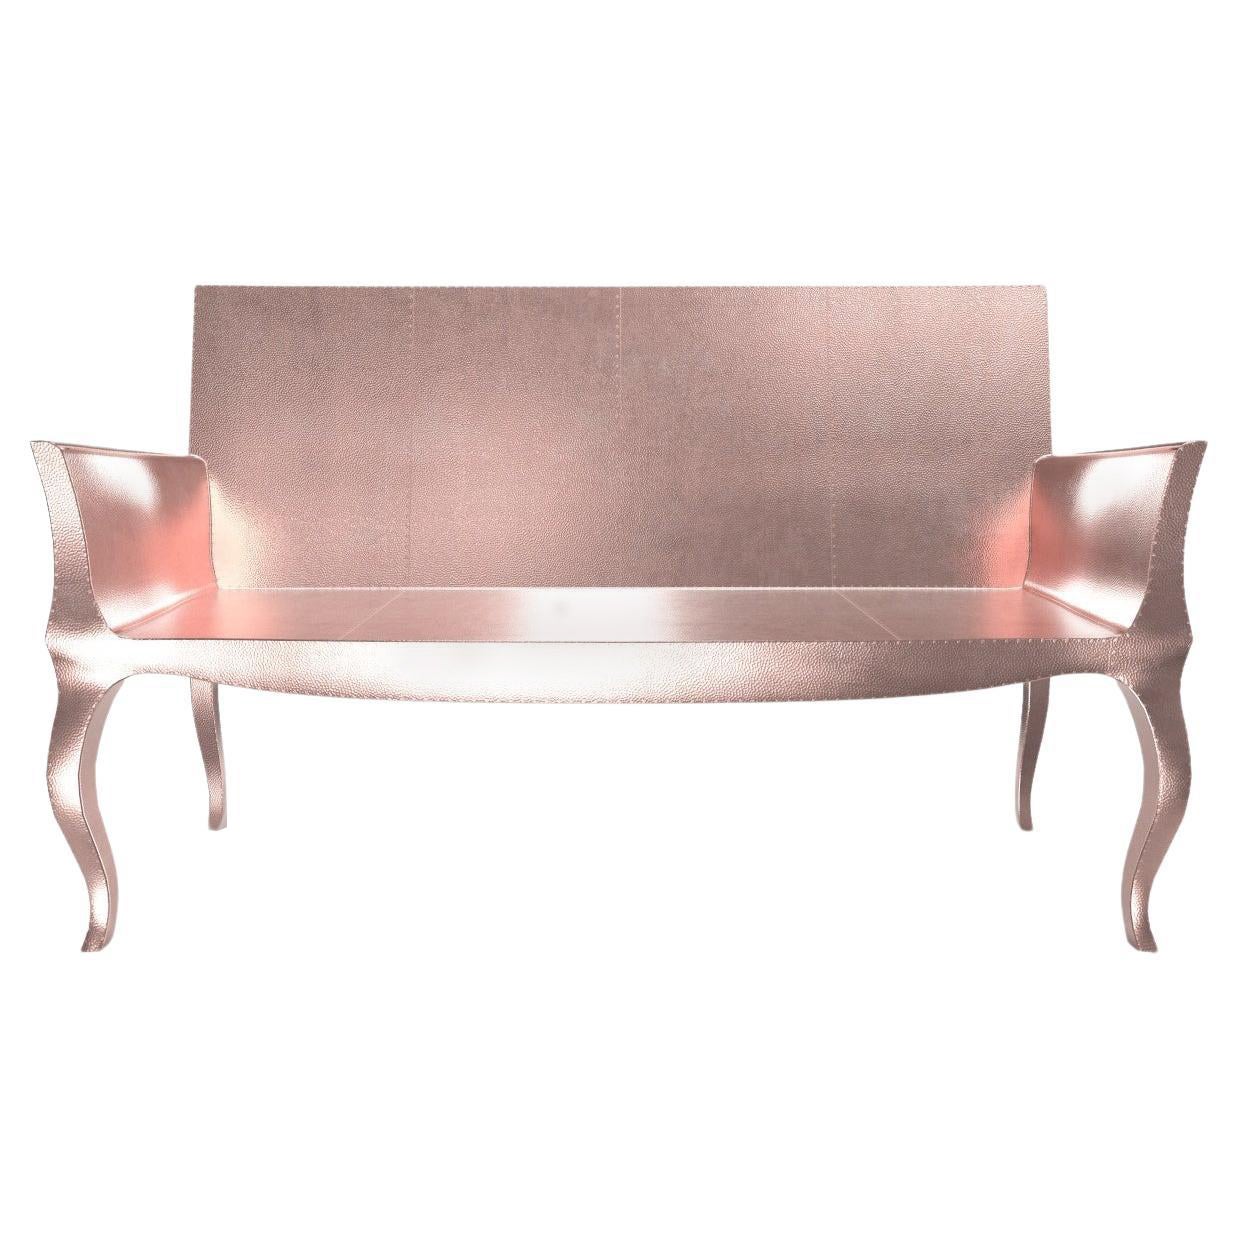 Louise Settee Art Deco Chaise Longues  in Mid. Hammered Copper by Paul Mathieu